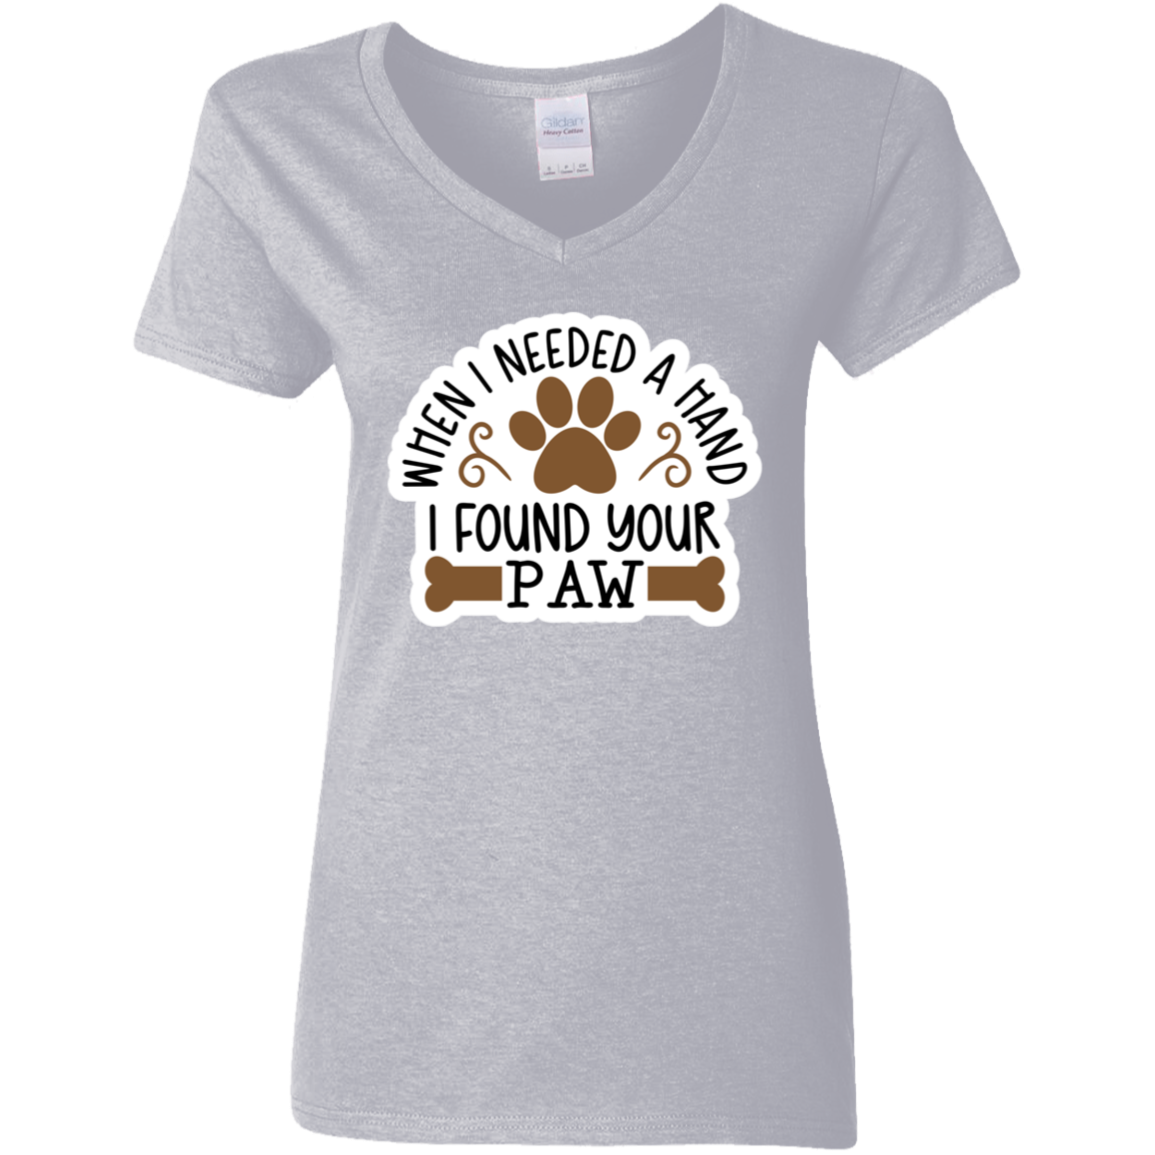 When I Needed a Hand I Found Your Paw Dog Rescue Ladies' V-Neck T-Shirt